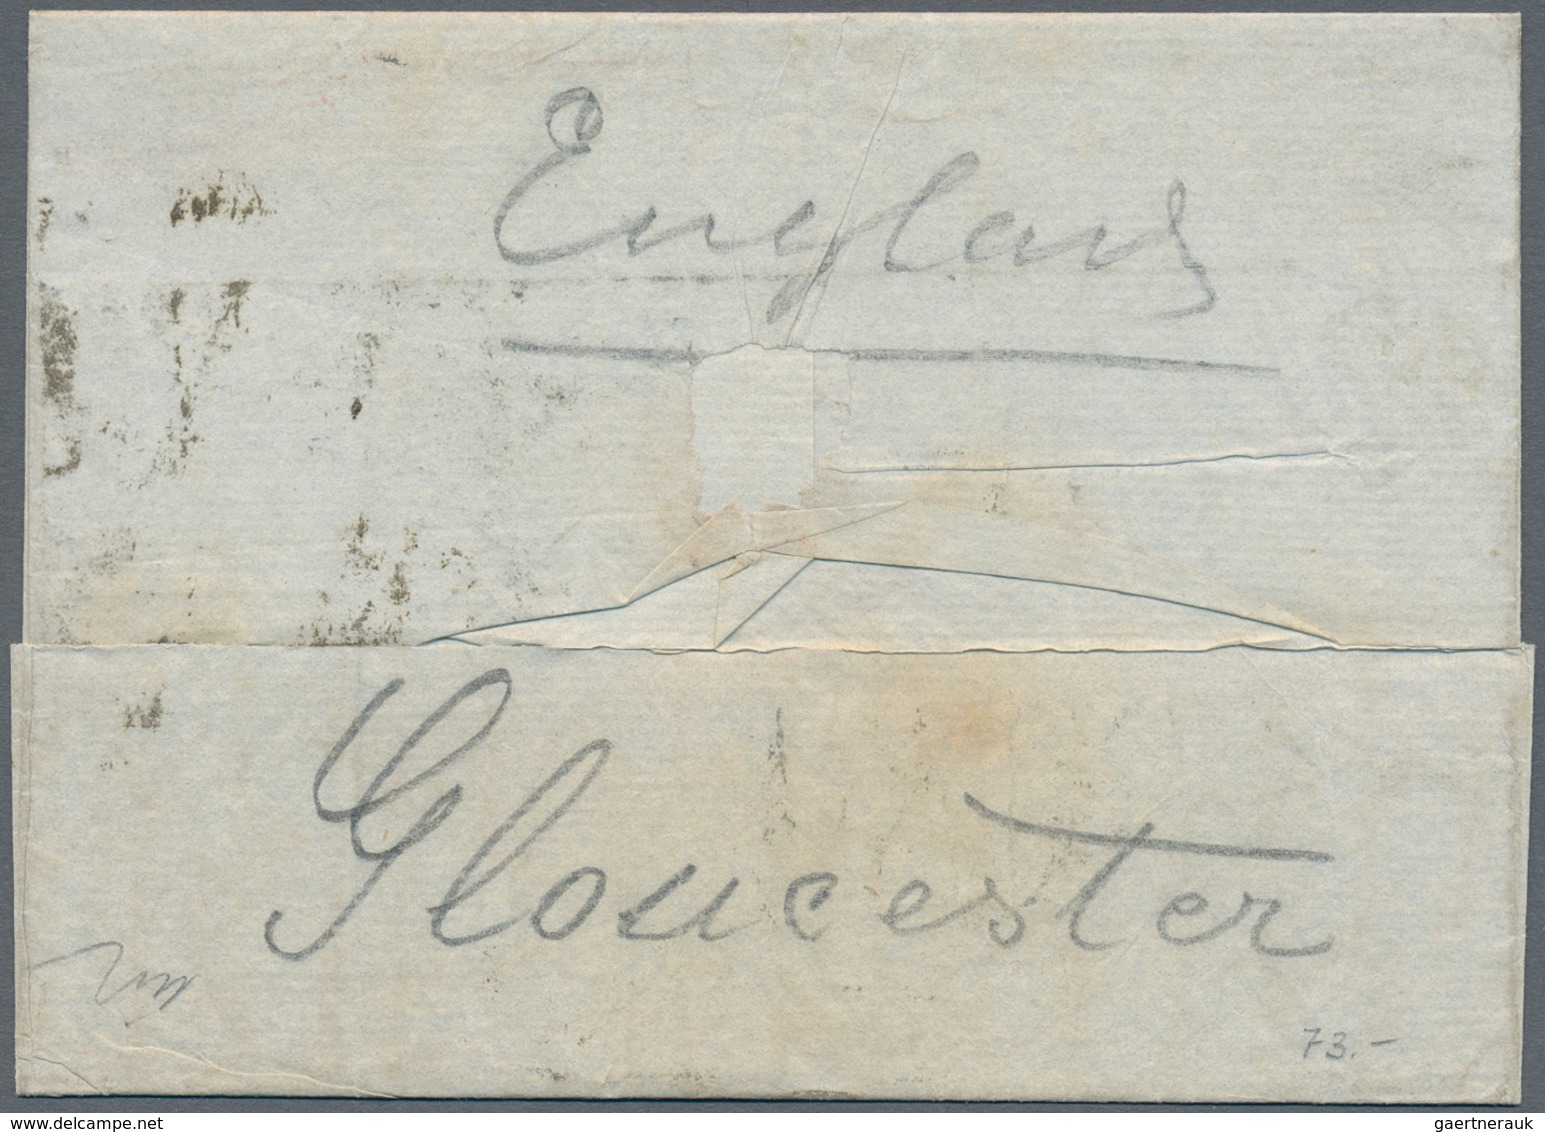 Transatlantikmail: 1840-62: Four stampless covers from/to the U.S.A. related to Austria including tw